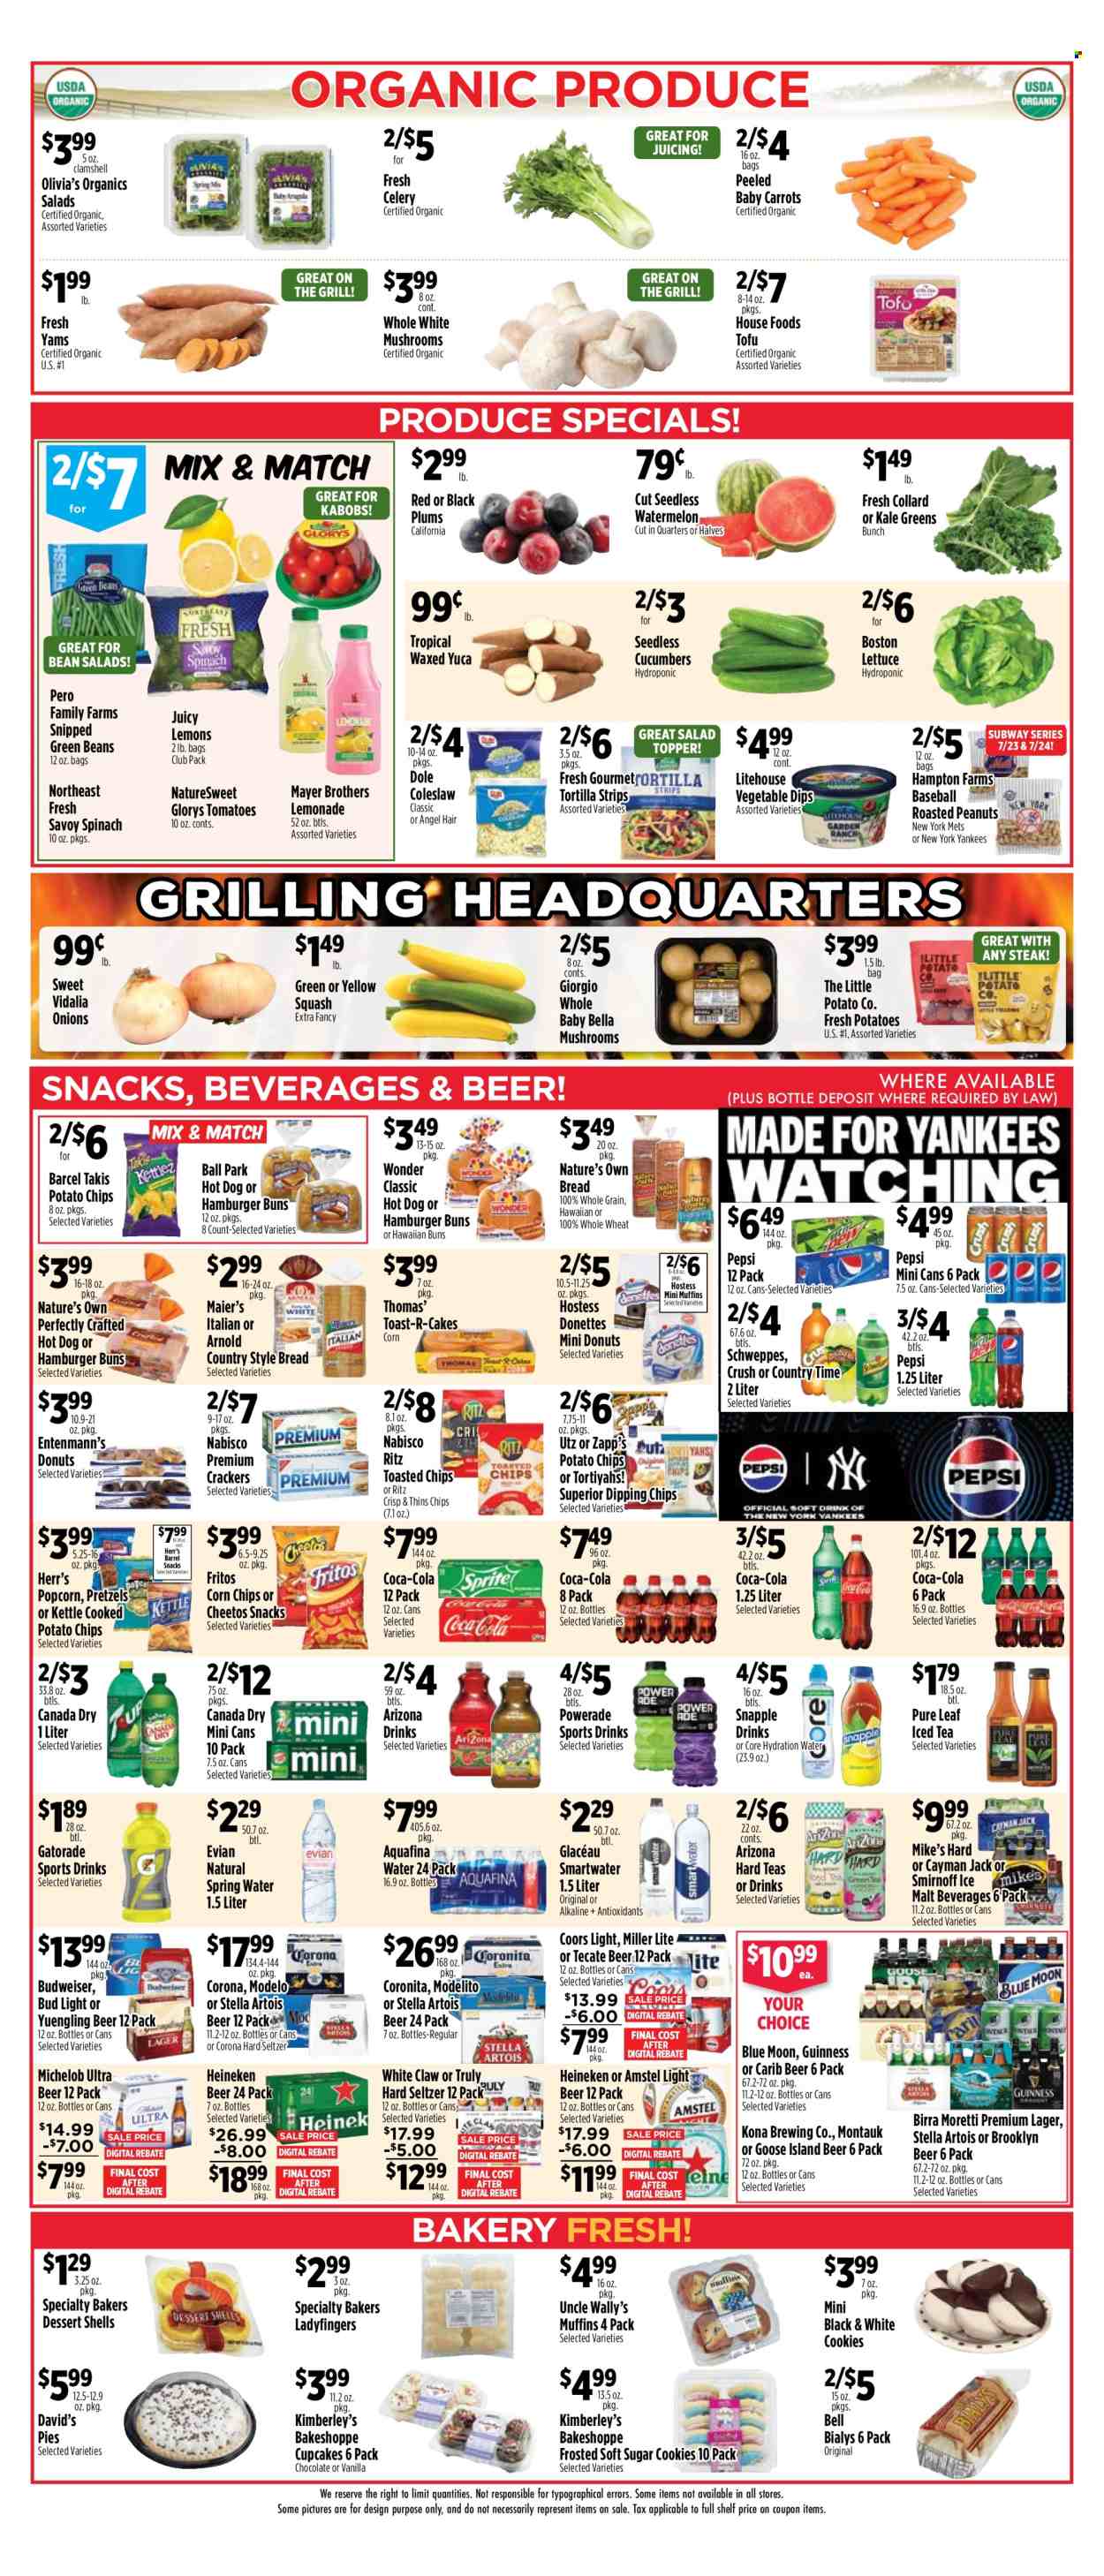 thumbnail - Pioneer Supermarkets Flyer - 07/21/2024 - 07/27/2024 - Sales products - mushrooms, baby bella mushrooms, hot dog rolls, pretzels, cake, pie, muffin, buns, burger buns, cupcake, donut, dessert shells, Entenmann's, dessert, beans, carrots, celery, cucumber, coleslaw, green beans, kale, onion, lettuce, salad, Dole, yellow squash, plums, red plums, black plums, snack, kabobs, tofu, dip, cookies, crackers, RITZ, Nabisco, Fritos, tortilla chips, potato chips, Cheetos, corn chips, popcorn, salty snack, roasted peanuts, peanuts, Canada Dry, Coca-Cola, ginger ale, lemonade, Schweppes, Powerade, Pepsi, energy drink, fruit drink, ice tea, soft drink, AriZona, Snapple, Country Time, Gatorade, electrolyte drink, Aquafina, spring water, bottled water, Smartwater, Evian, water, carbonated soft drink, Pure Leaf, alcohol, Smirnoff, vodka, BROTHERS, White Claw, Hard Seltzer, TRULY, beer, Budweiser, Stella Artois, Bud Light, Corona Extra, Heineken, Guinness, Lager, Modelo, Birra Moretti, Amstel, steak, Bakers, Nature's Own, Brooklyn Beer, Miller Lite, Coors, Blue Moon, Yuengling, Michelob. Page 6.